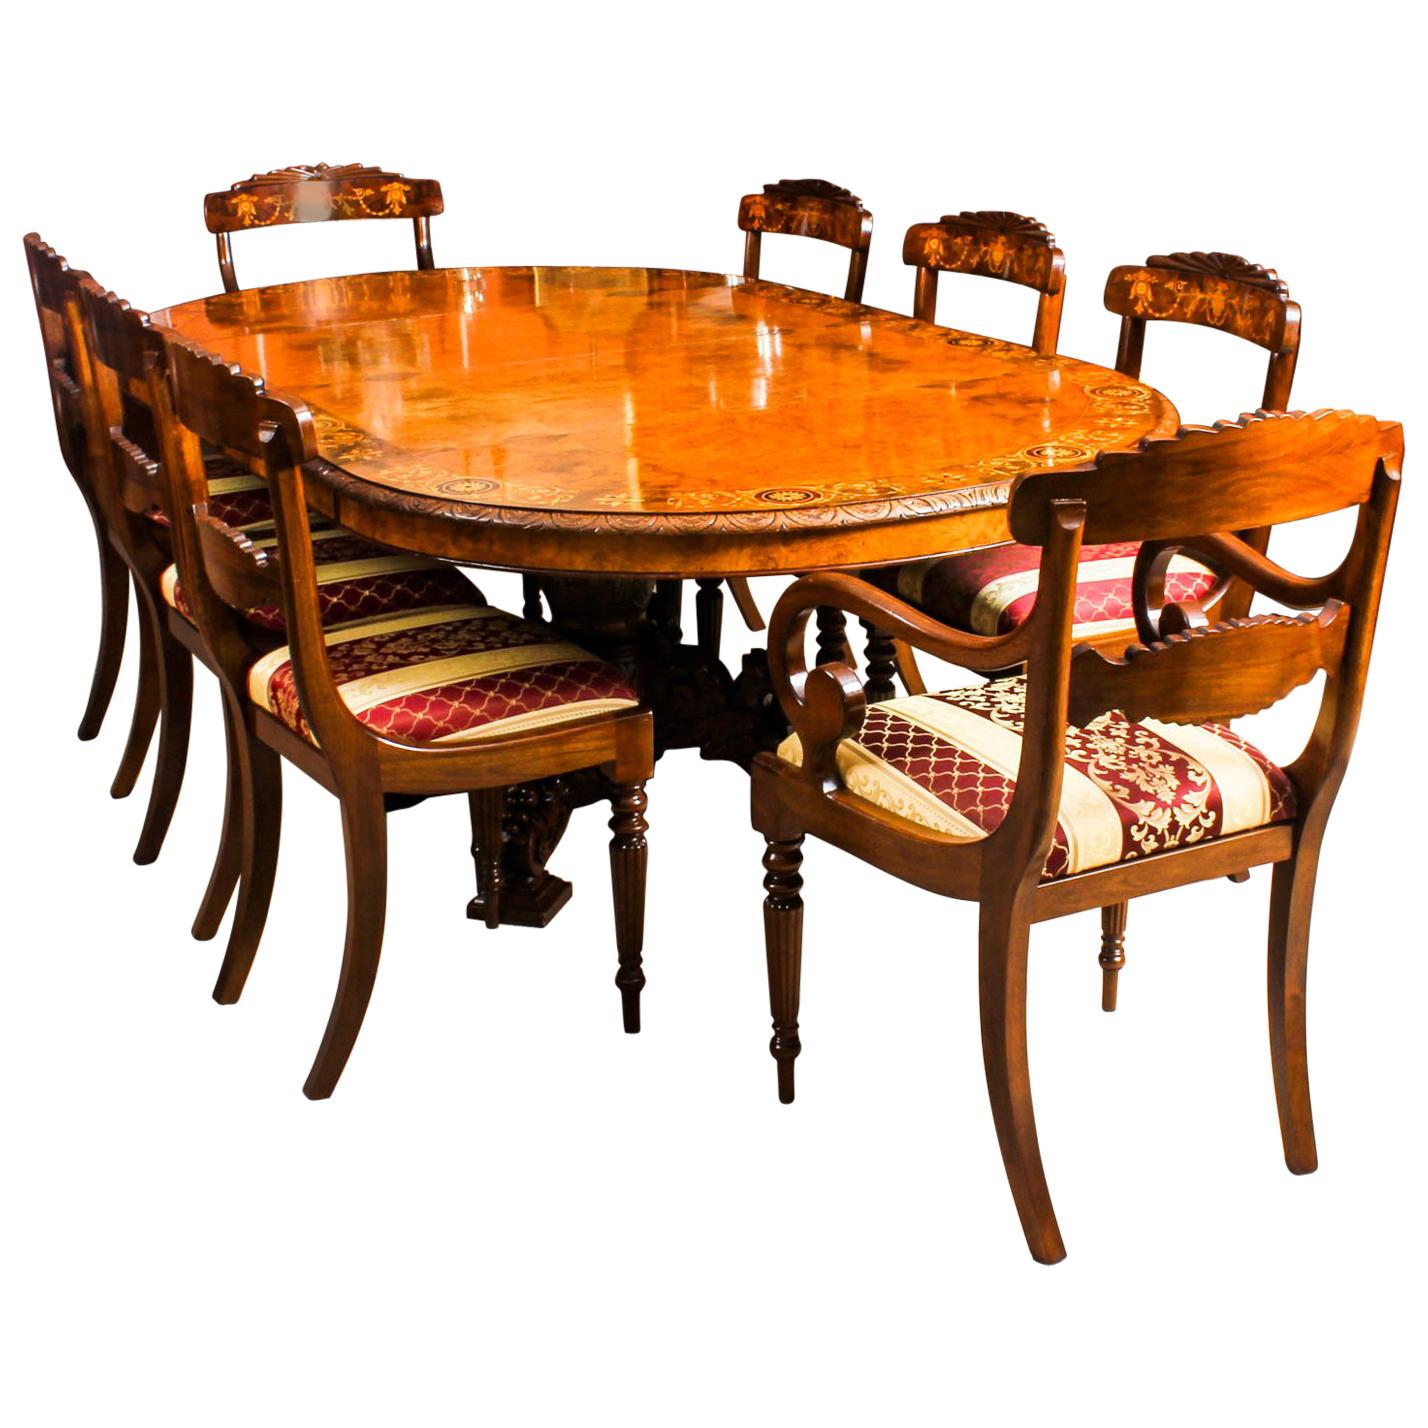 Antique Pollard Oak Victorian Dining Table 19th Century and Eight Bespoke Chairs